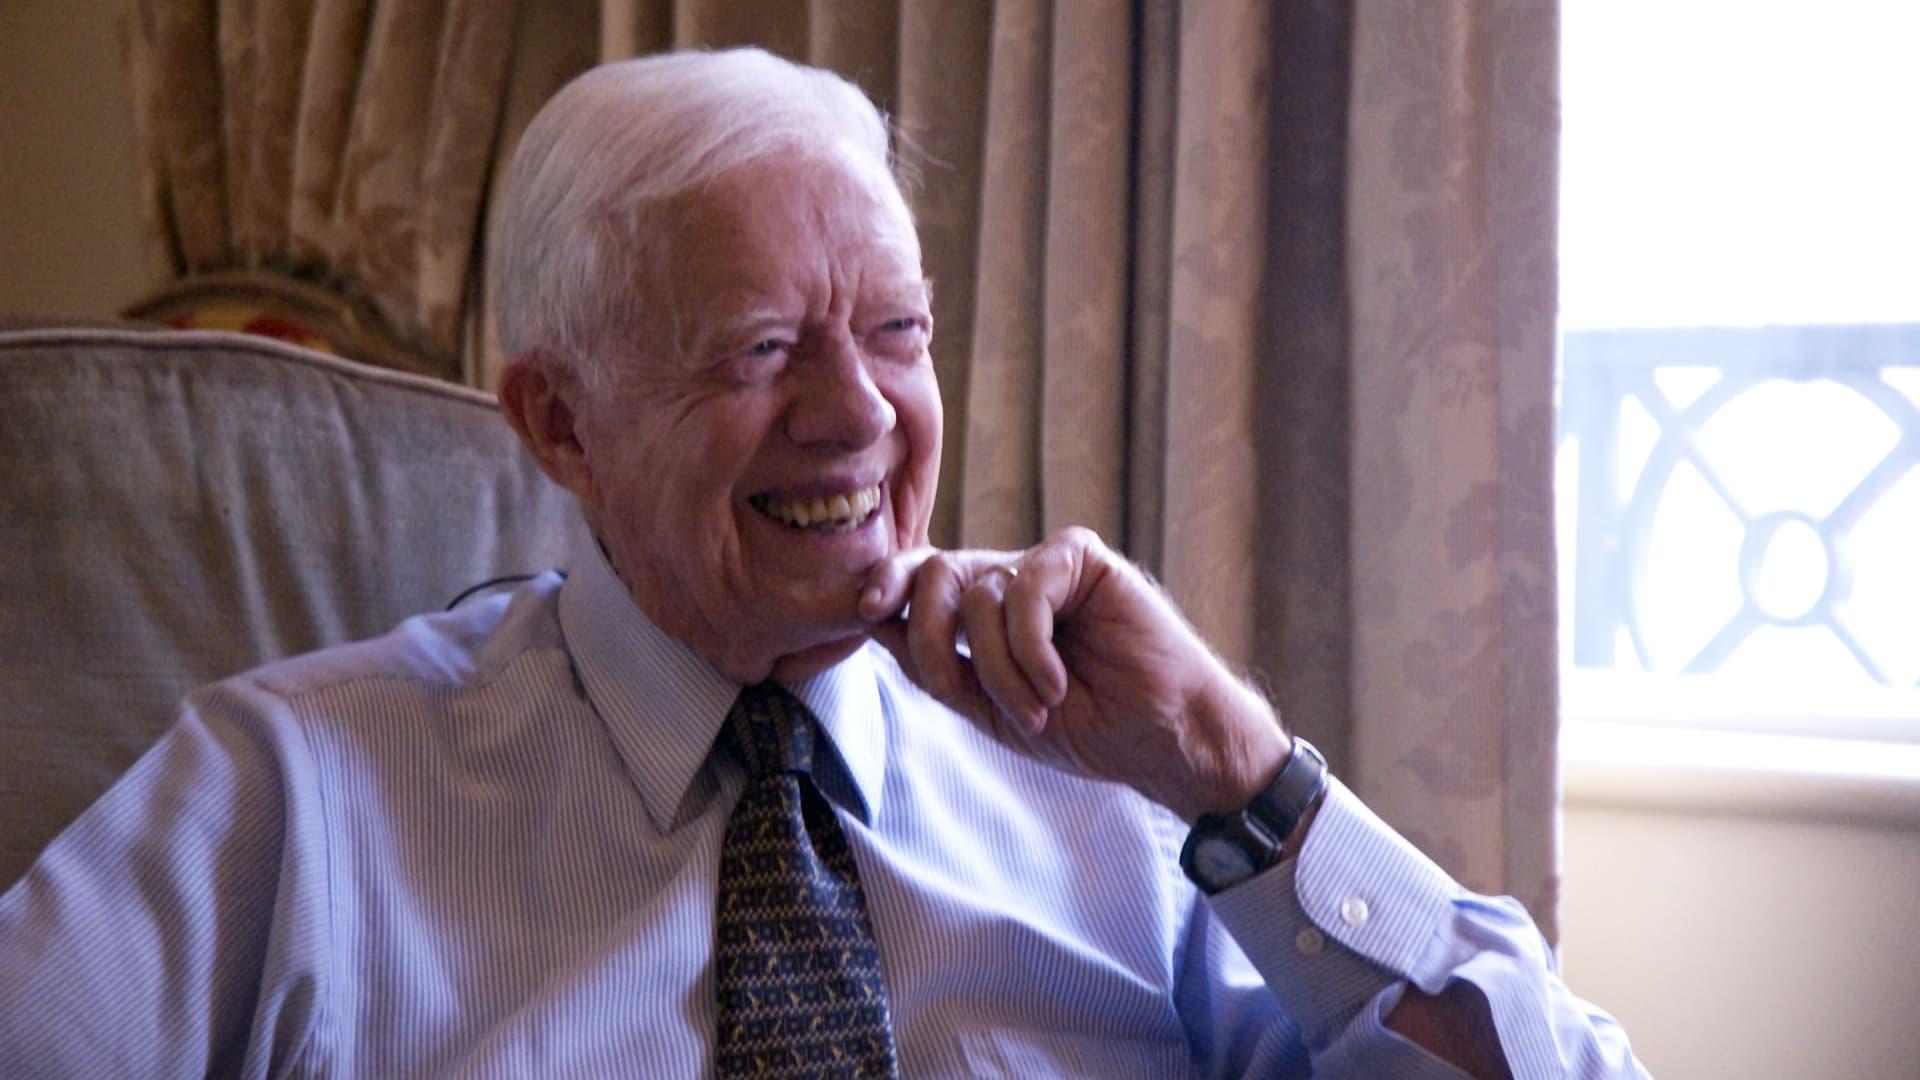 Jimmy Carter: Man from Plains backdrop